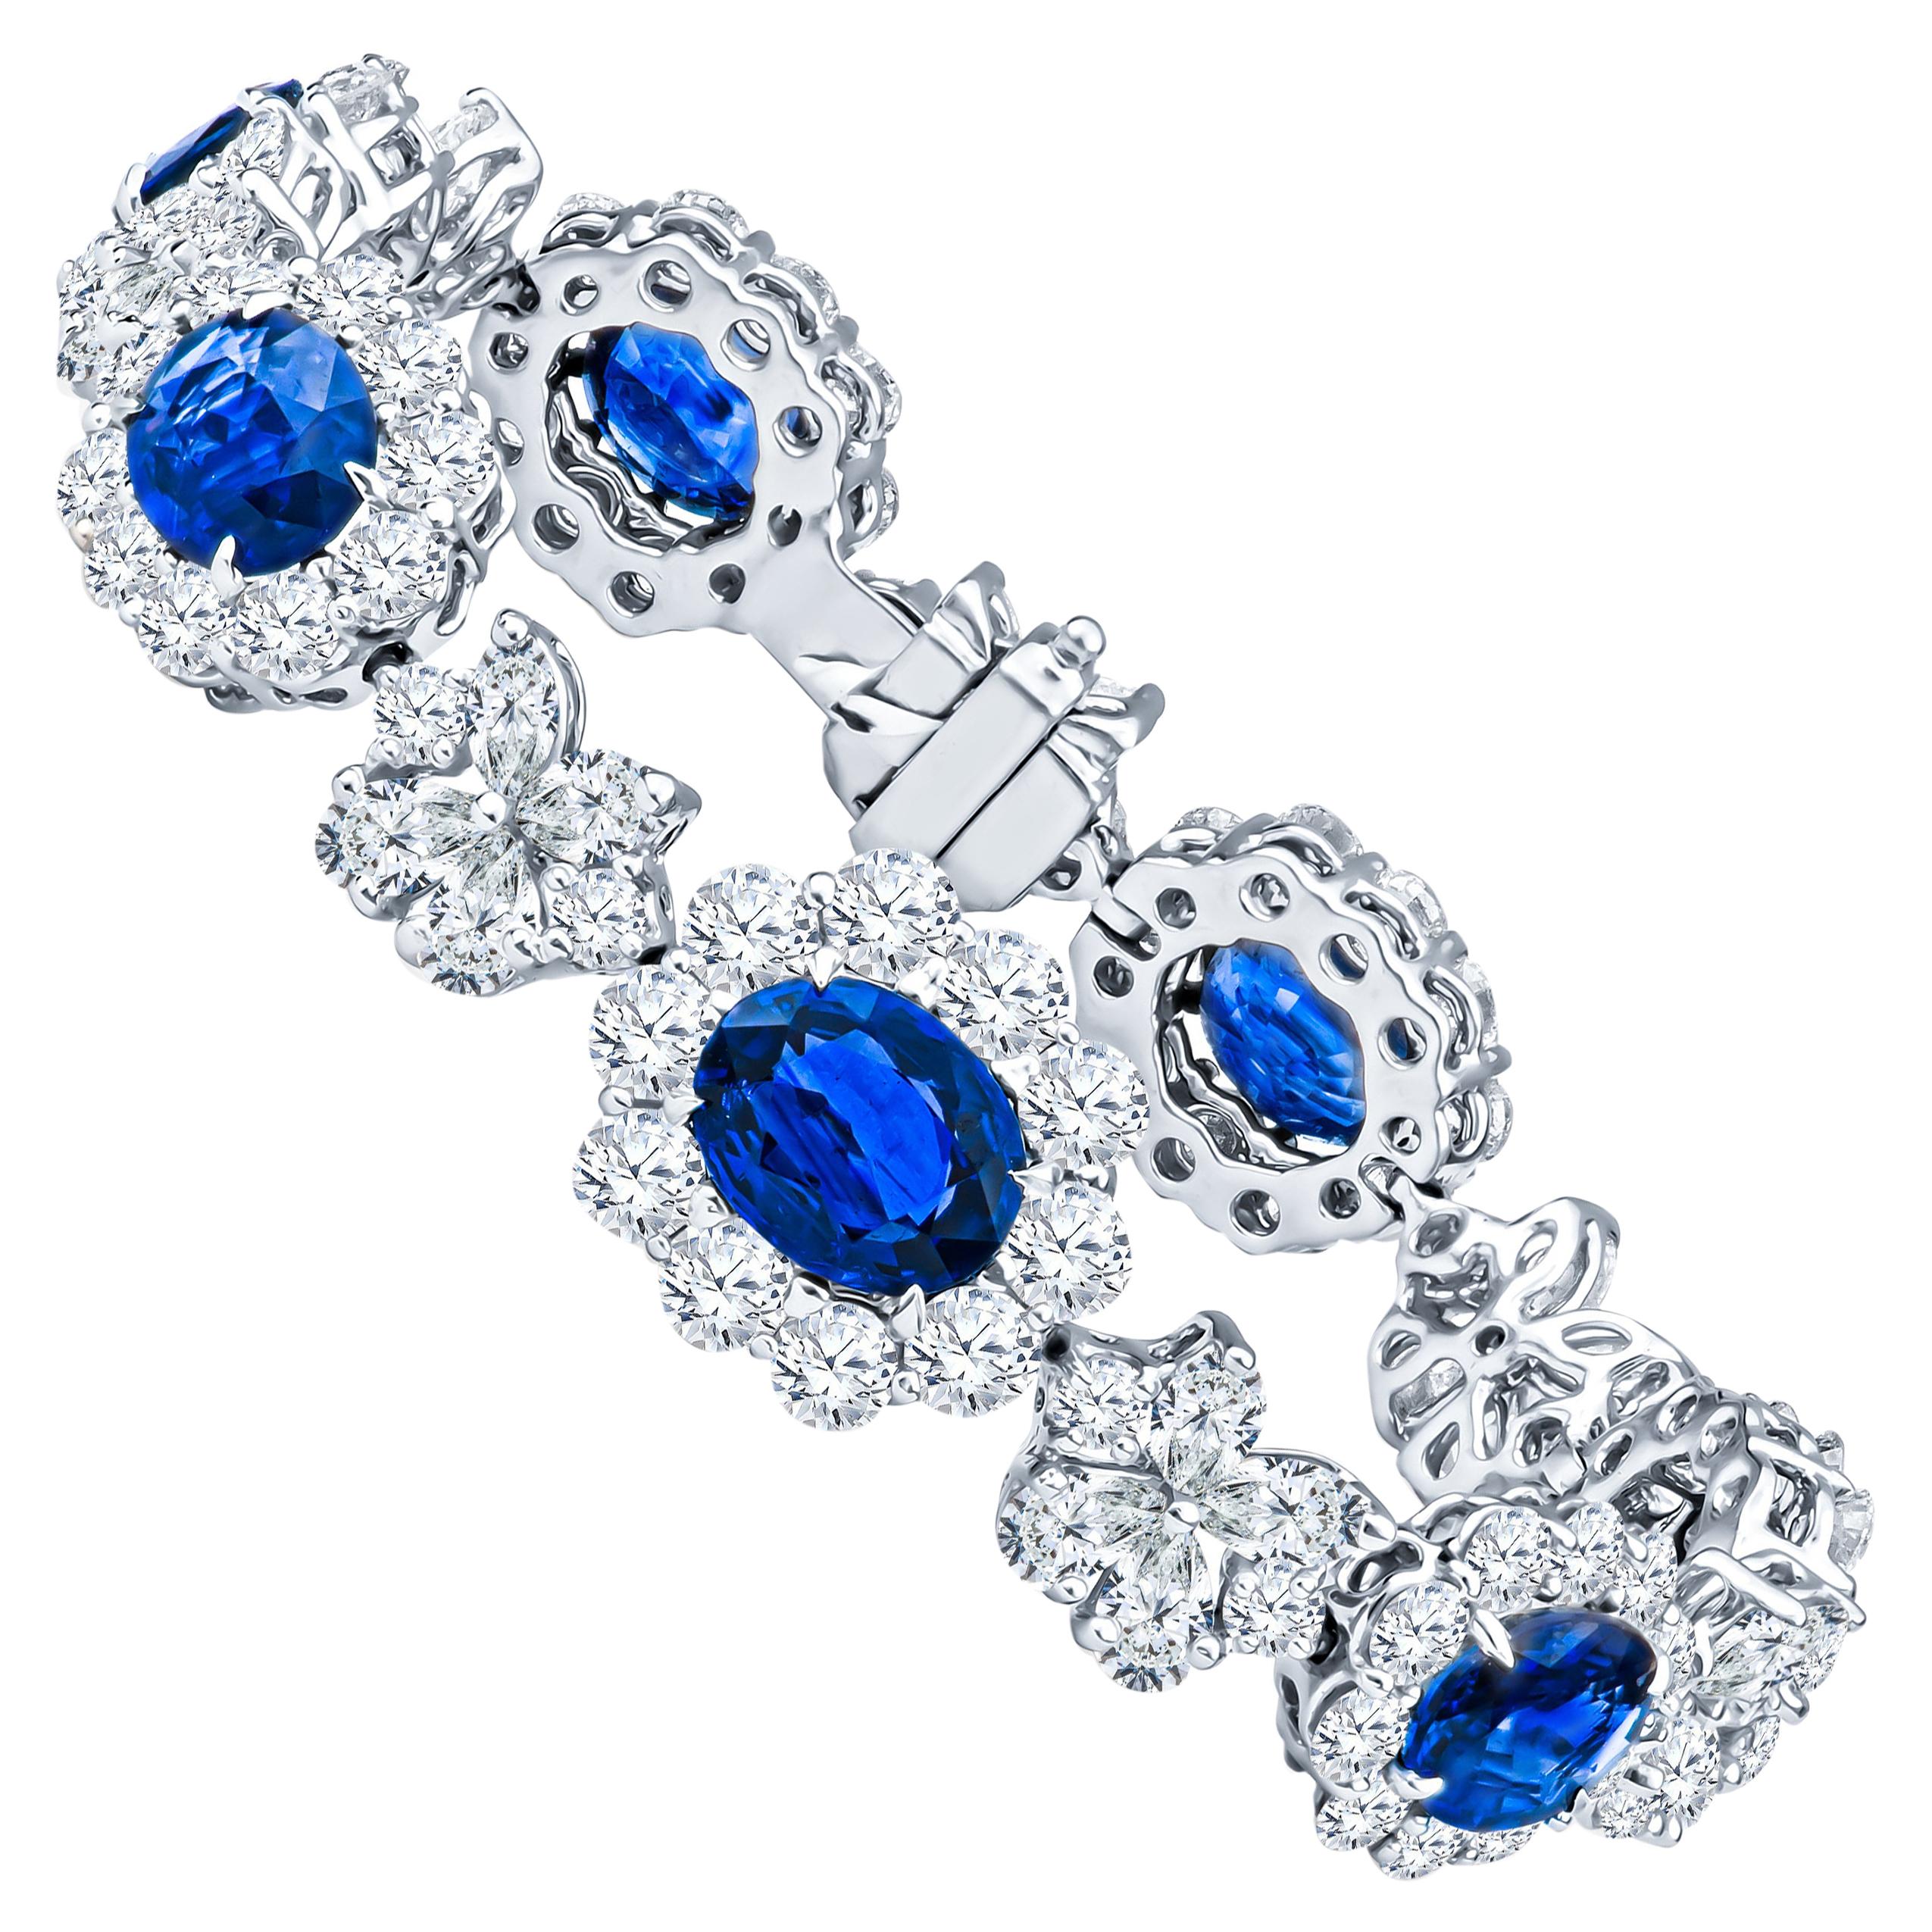 15.88 Carat Oval Sapphires and 16.42 Carat Diamond Flower and Butterfly Bracelet